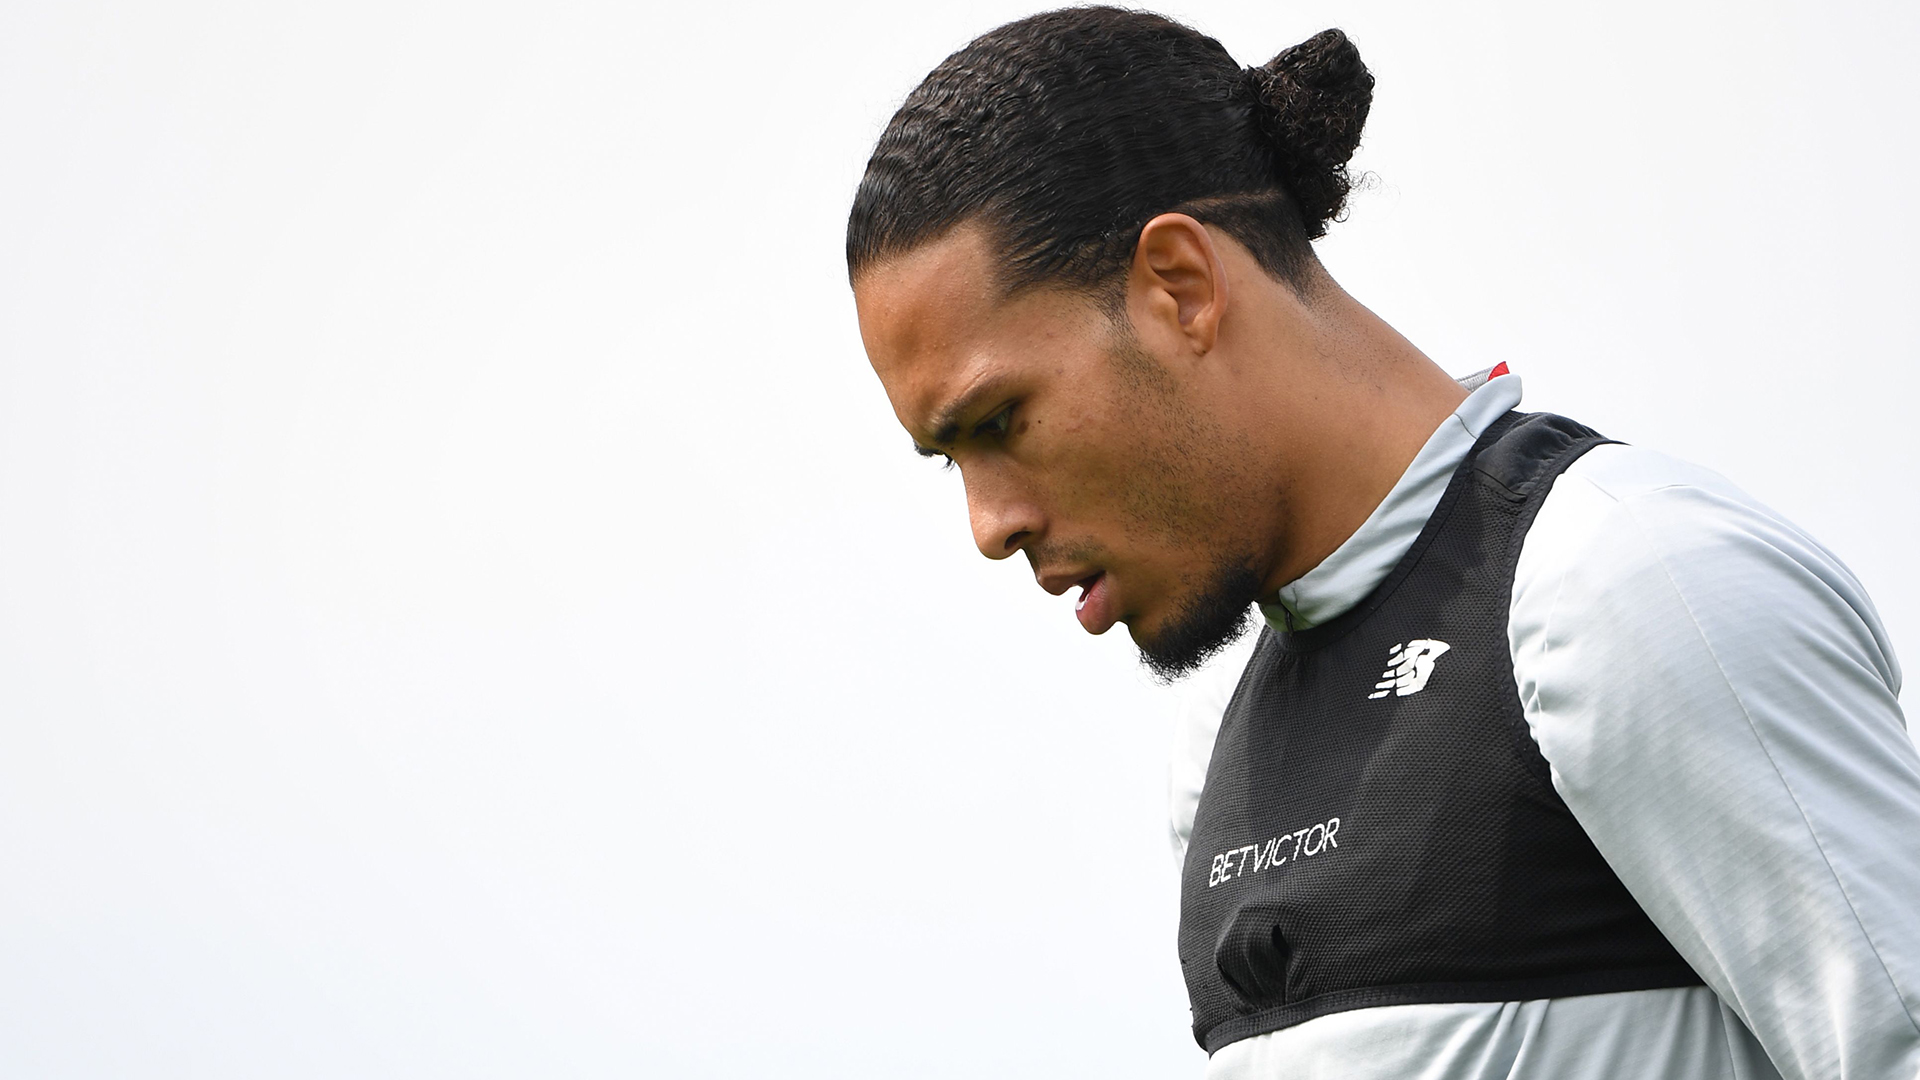 'Step by step' - Van Dijk gives hope to Liverpool fans with recovery video